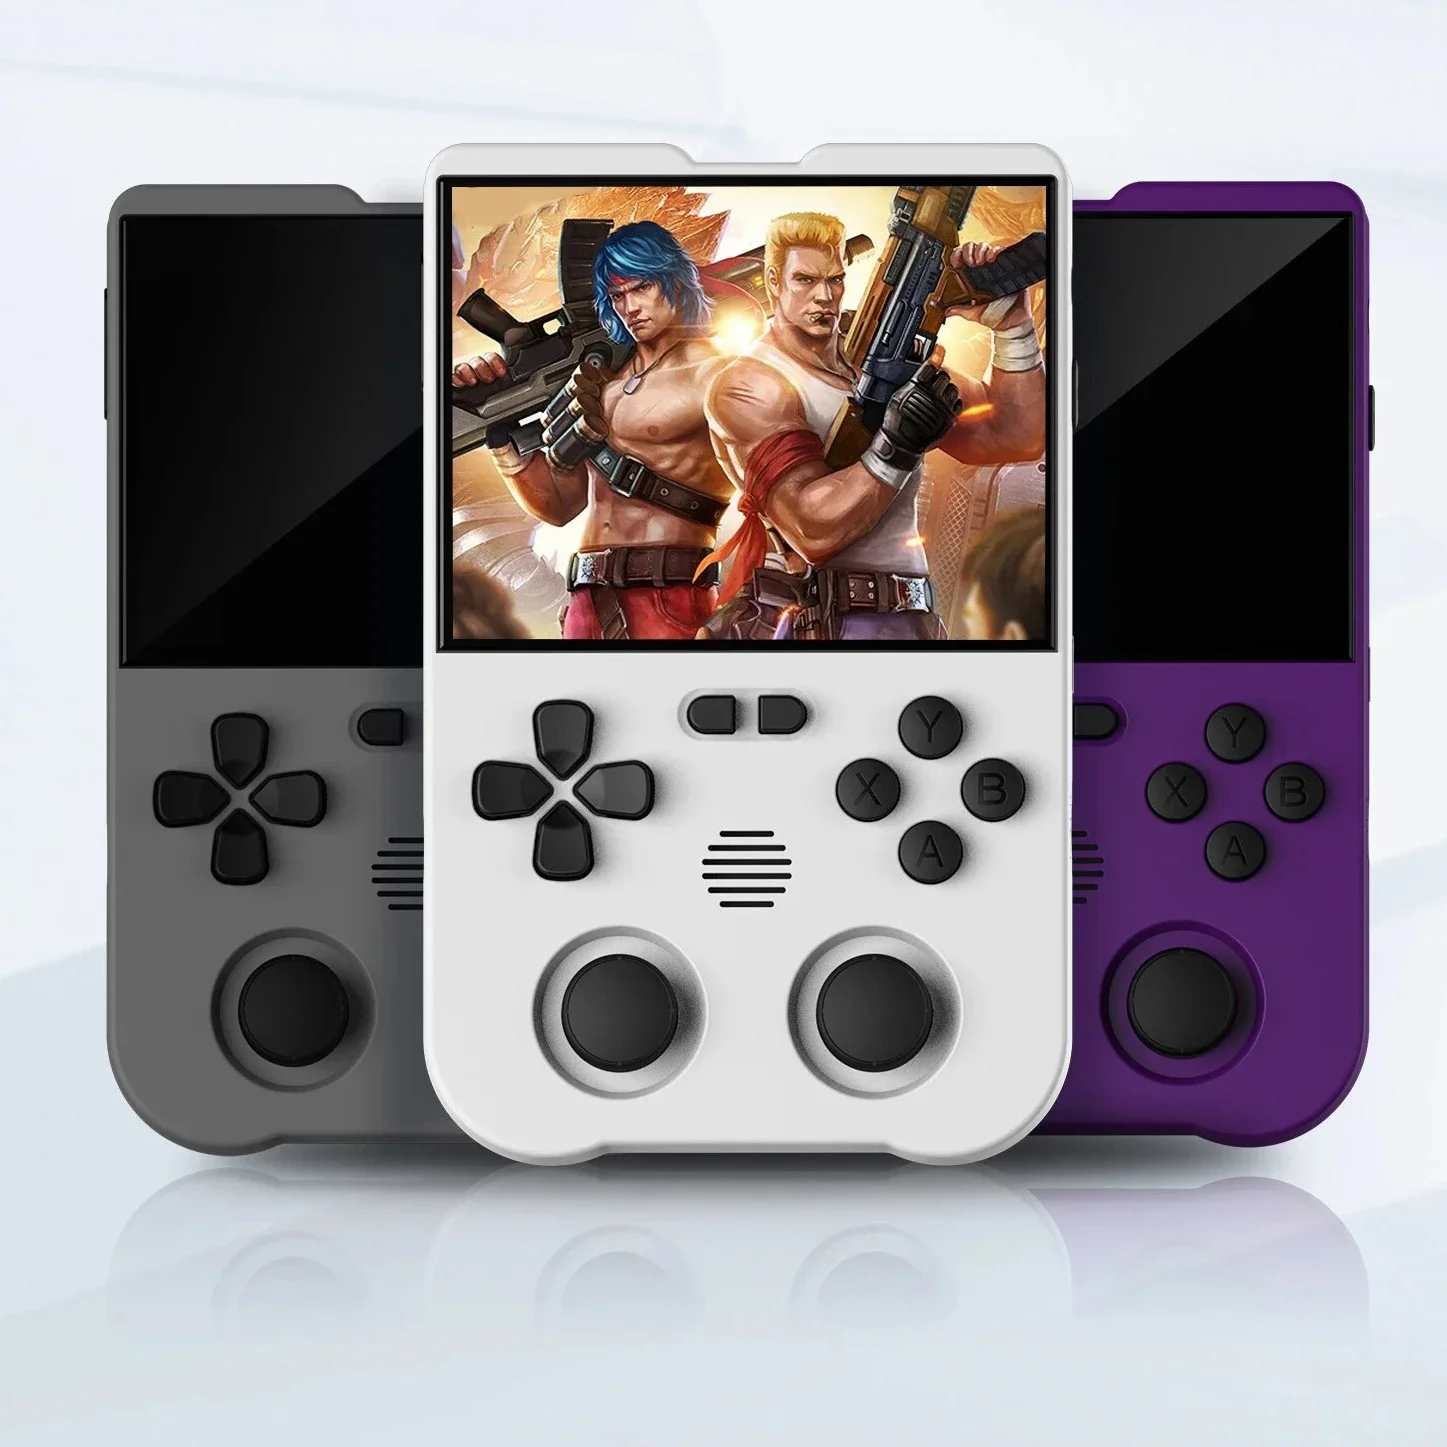 

XU10 Handheld Game Console 3.5" IPS Screen 3000mAh Battery Linux System Built-in Retro Games Portable Video Game Console